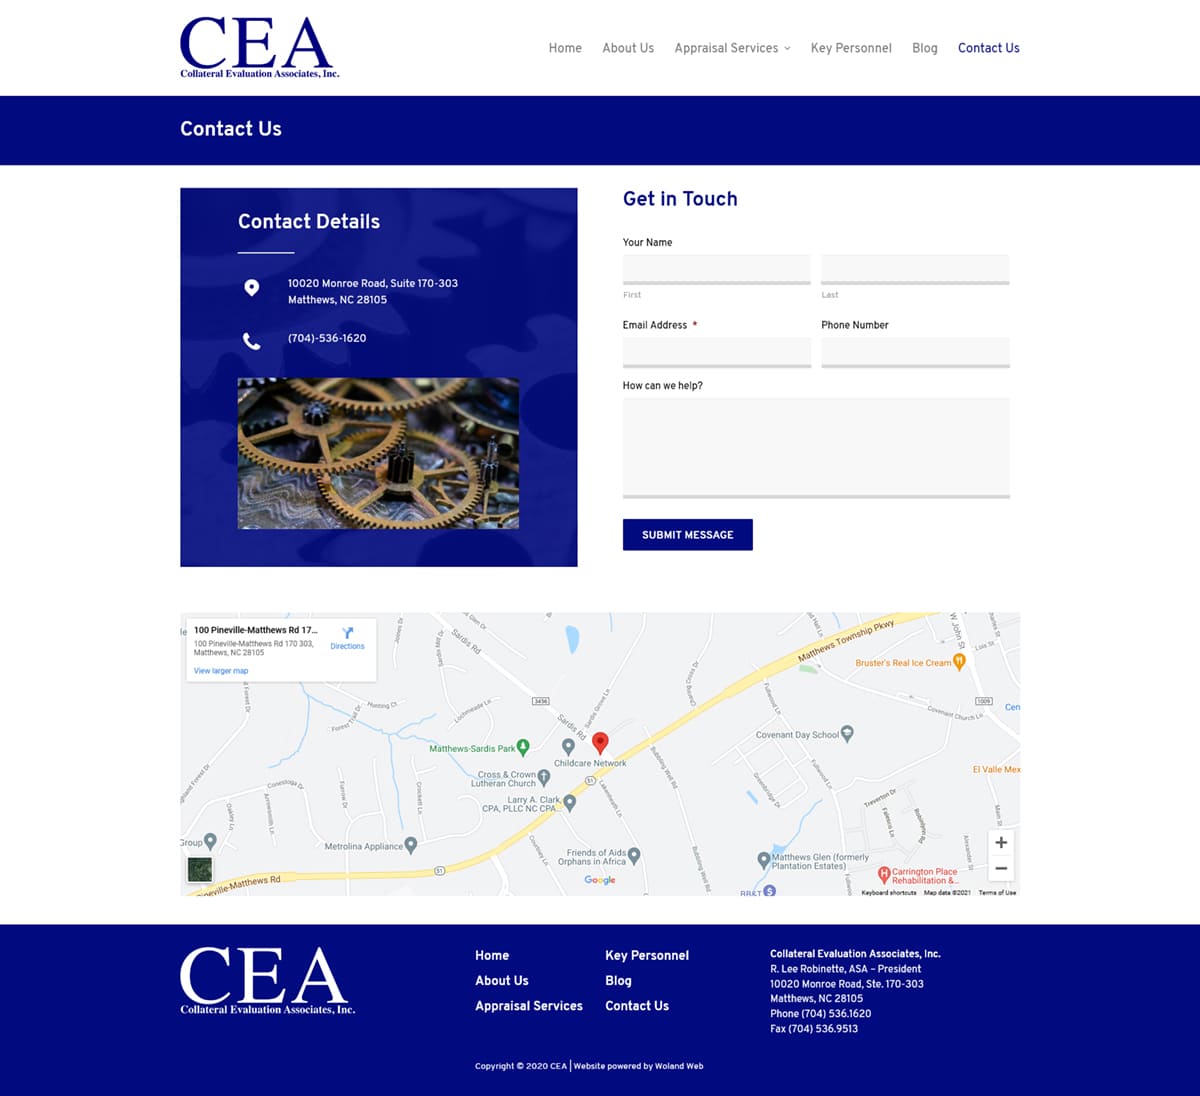 Collateral Evaluation Associates website contact page screenshot